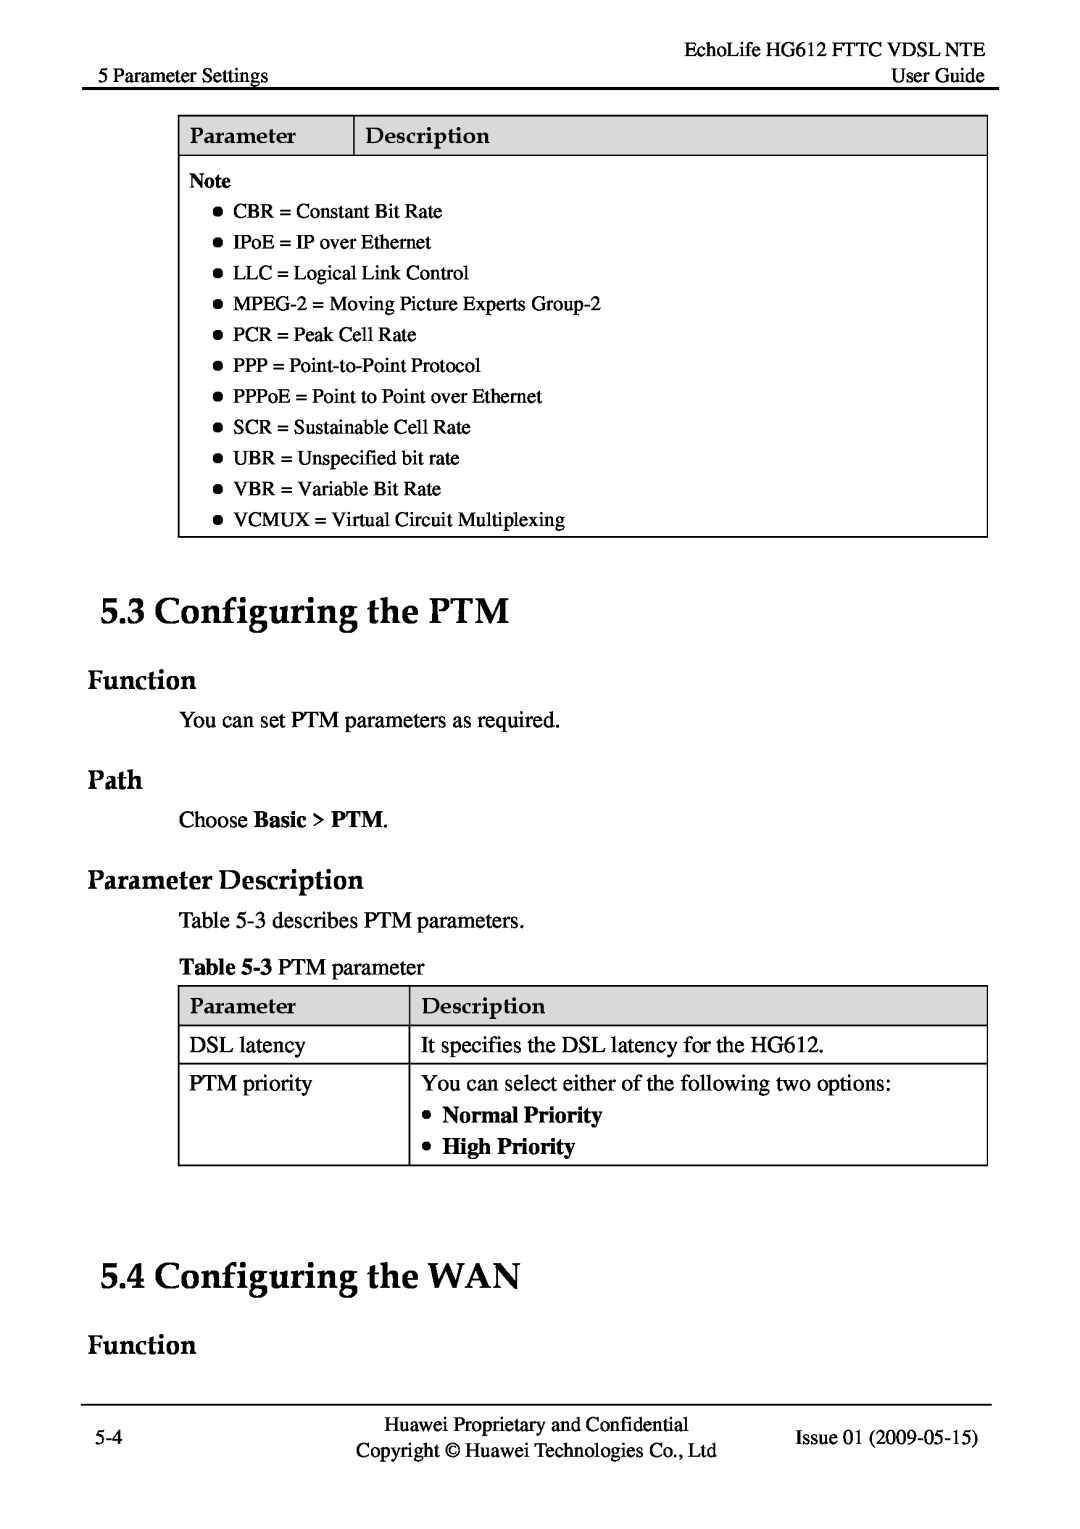 Huawei HG612FTTC VDSL NTE manual Configuring the PTM, Configuring the WAN, Function, Path, Parameter Description 